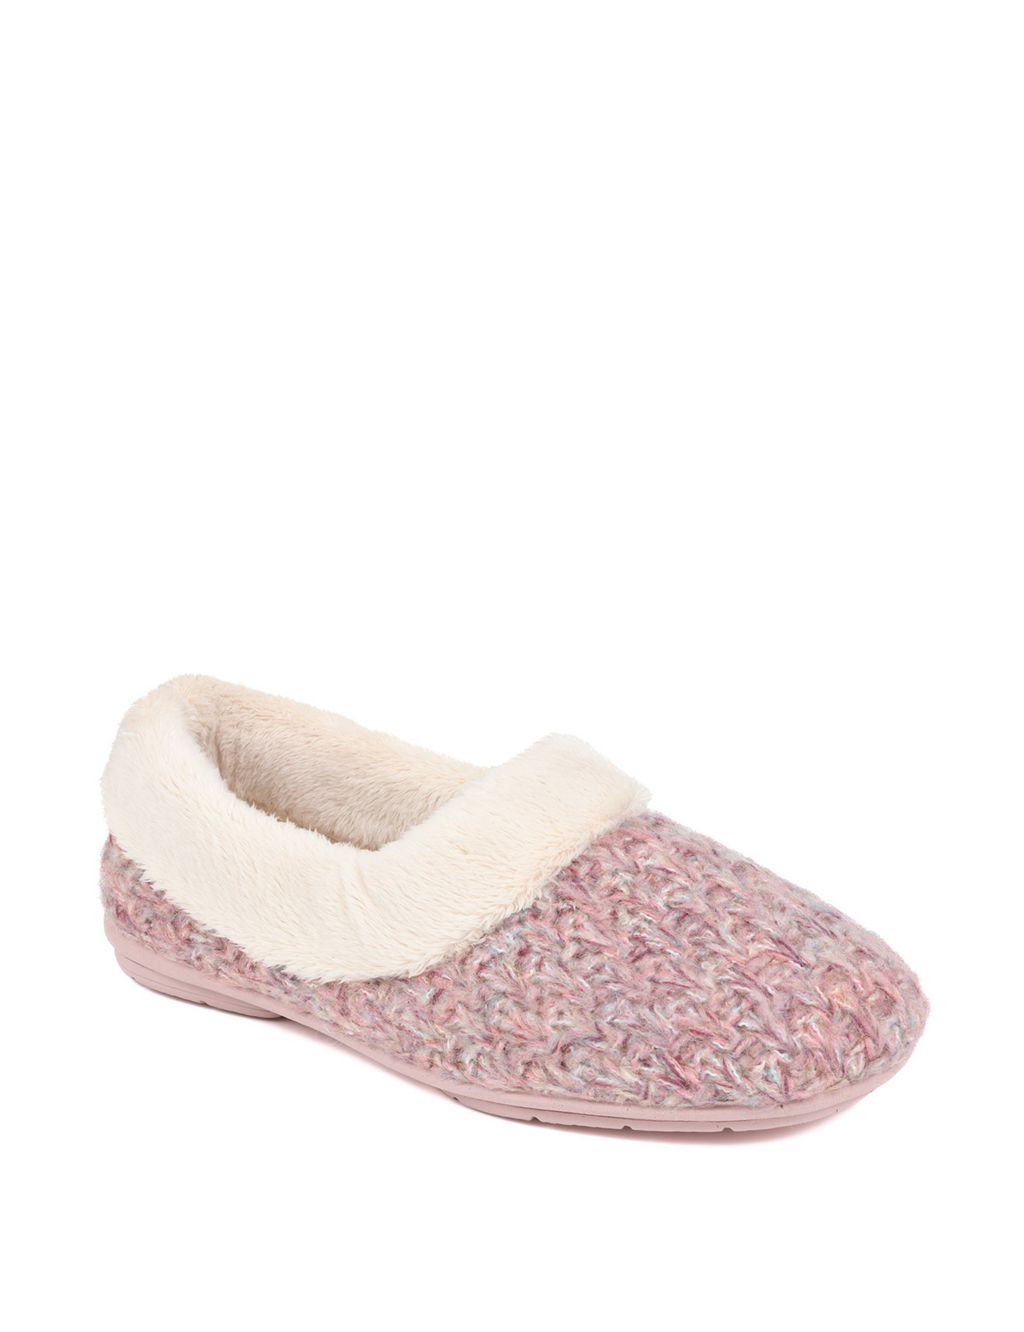 Faux Fur Lined Round Toe Slippers image 2